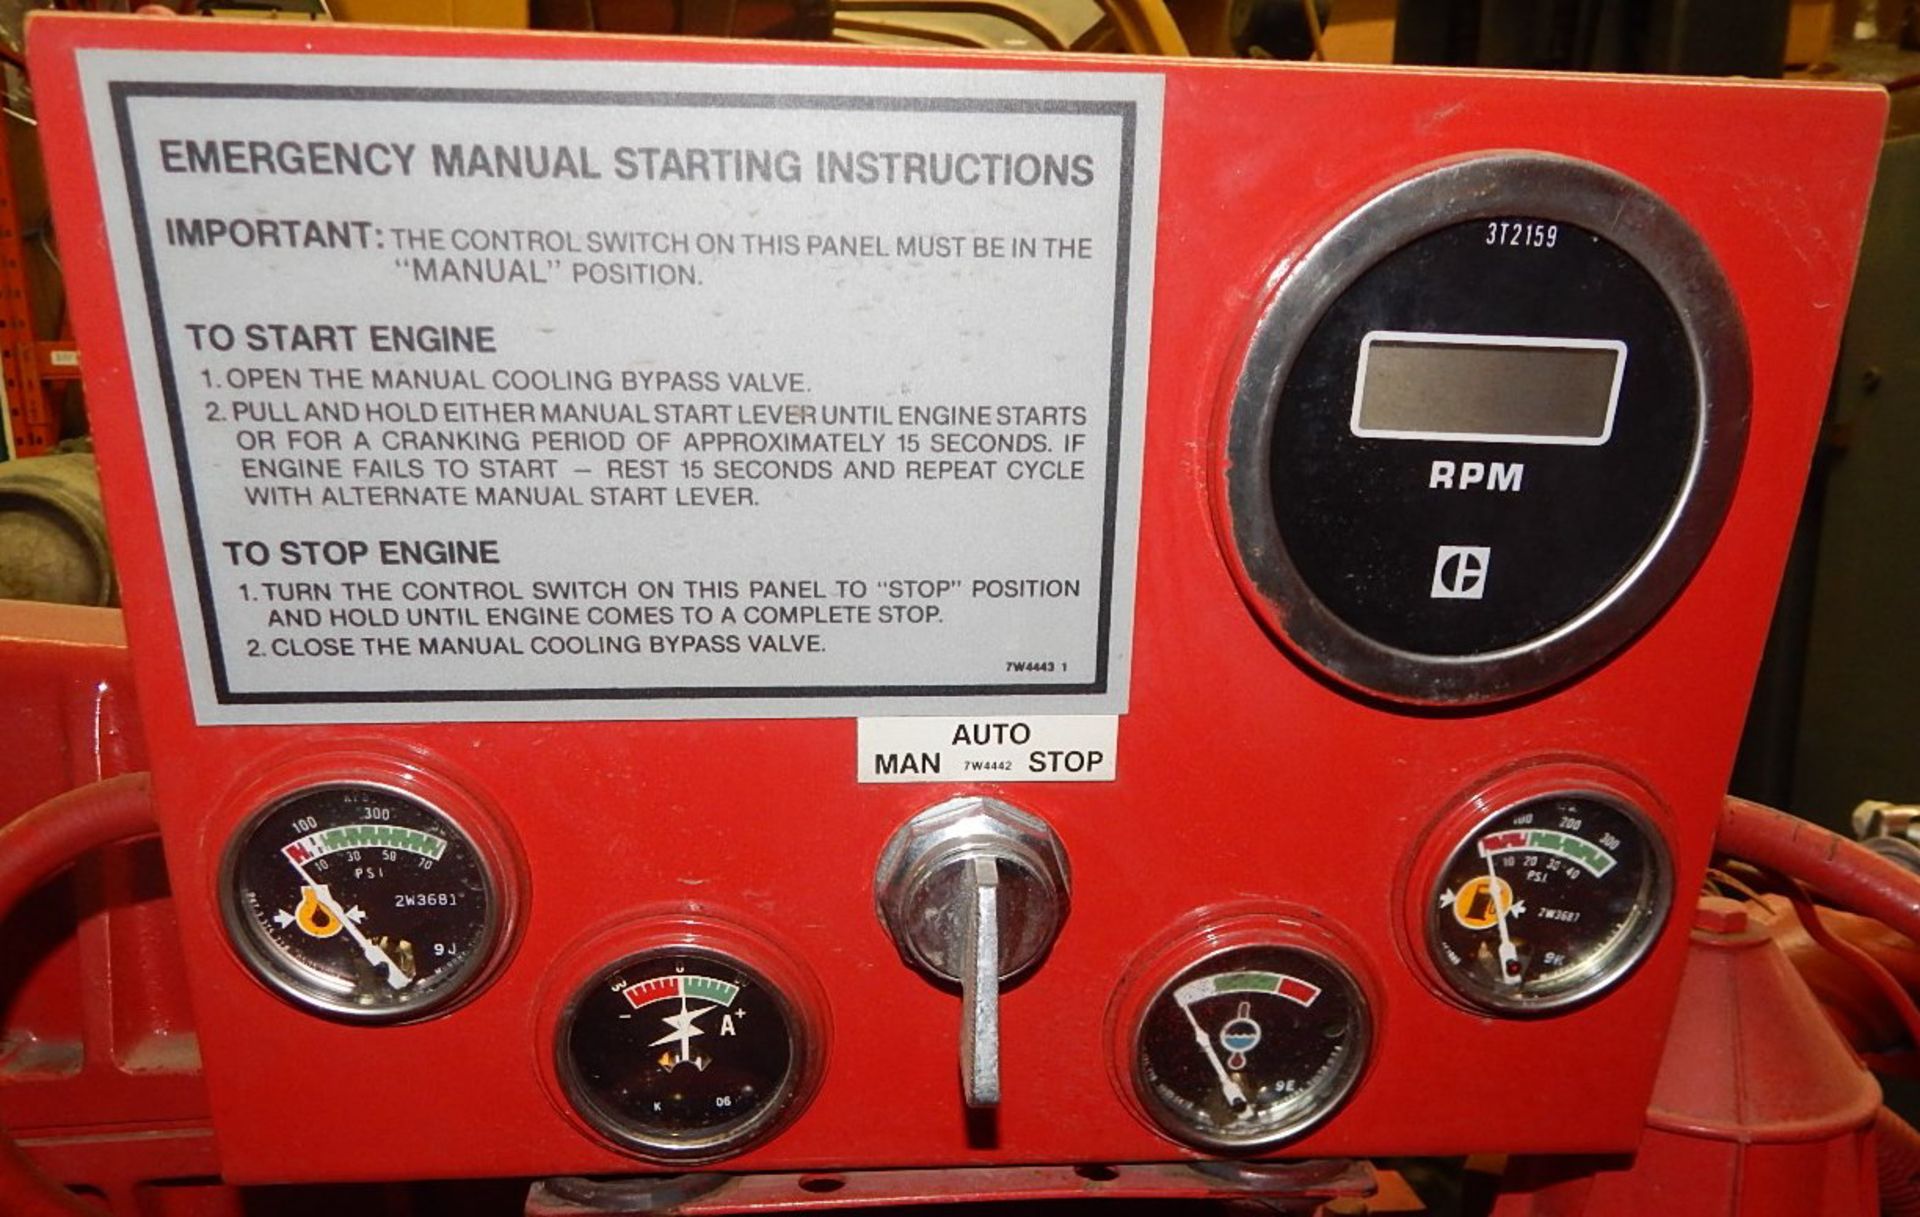 PEERLESS PUMP BAEE15 SKID-MOUNTED CENTRIFUGAL FIRE PUMP WITH 2500 GPM, 121 PSI, 2100 RPM, - Image 3 of 7